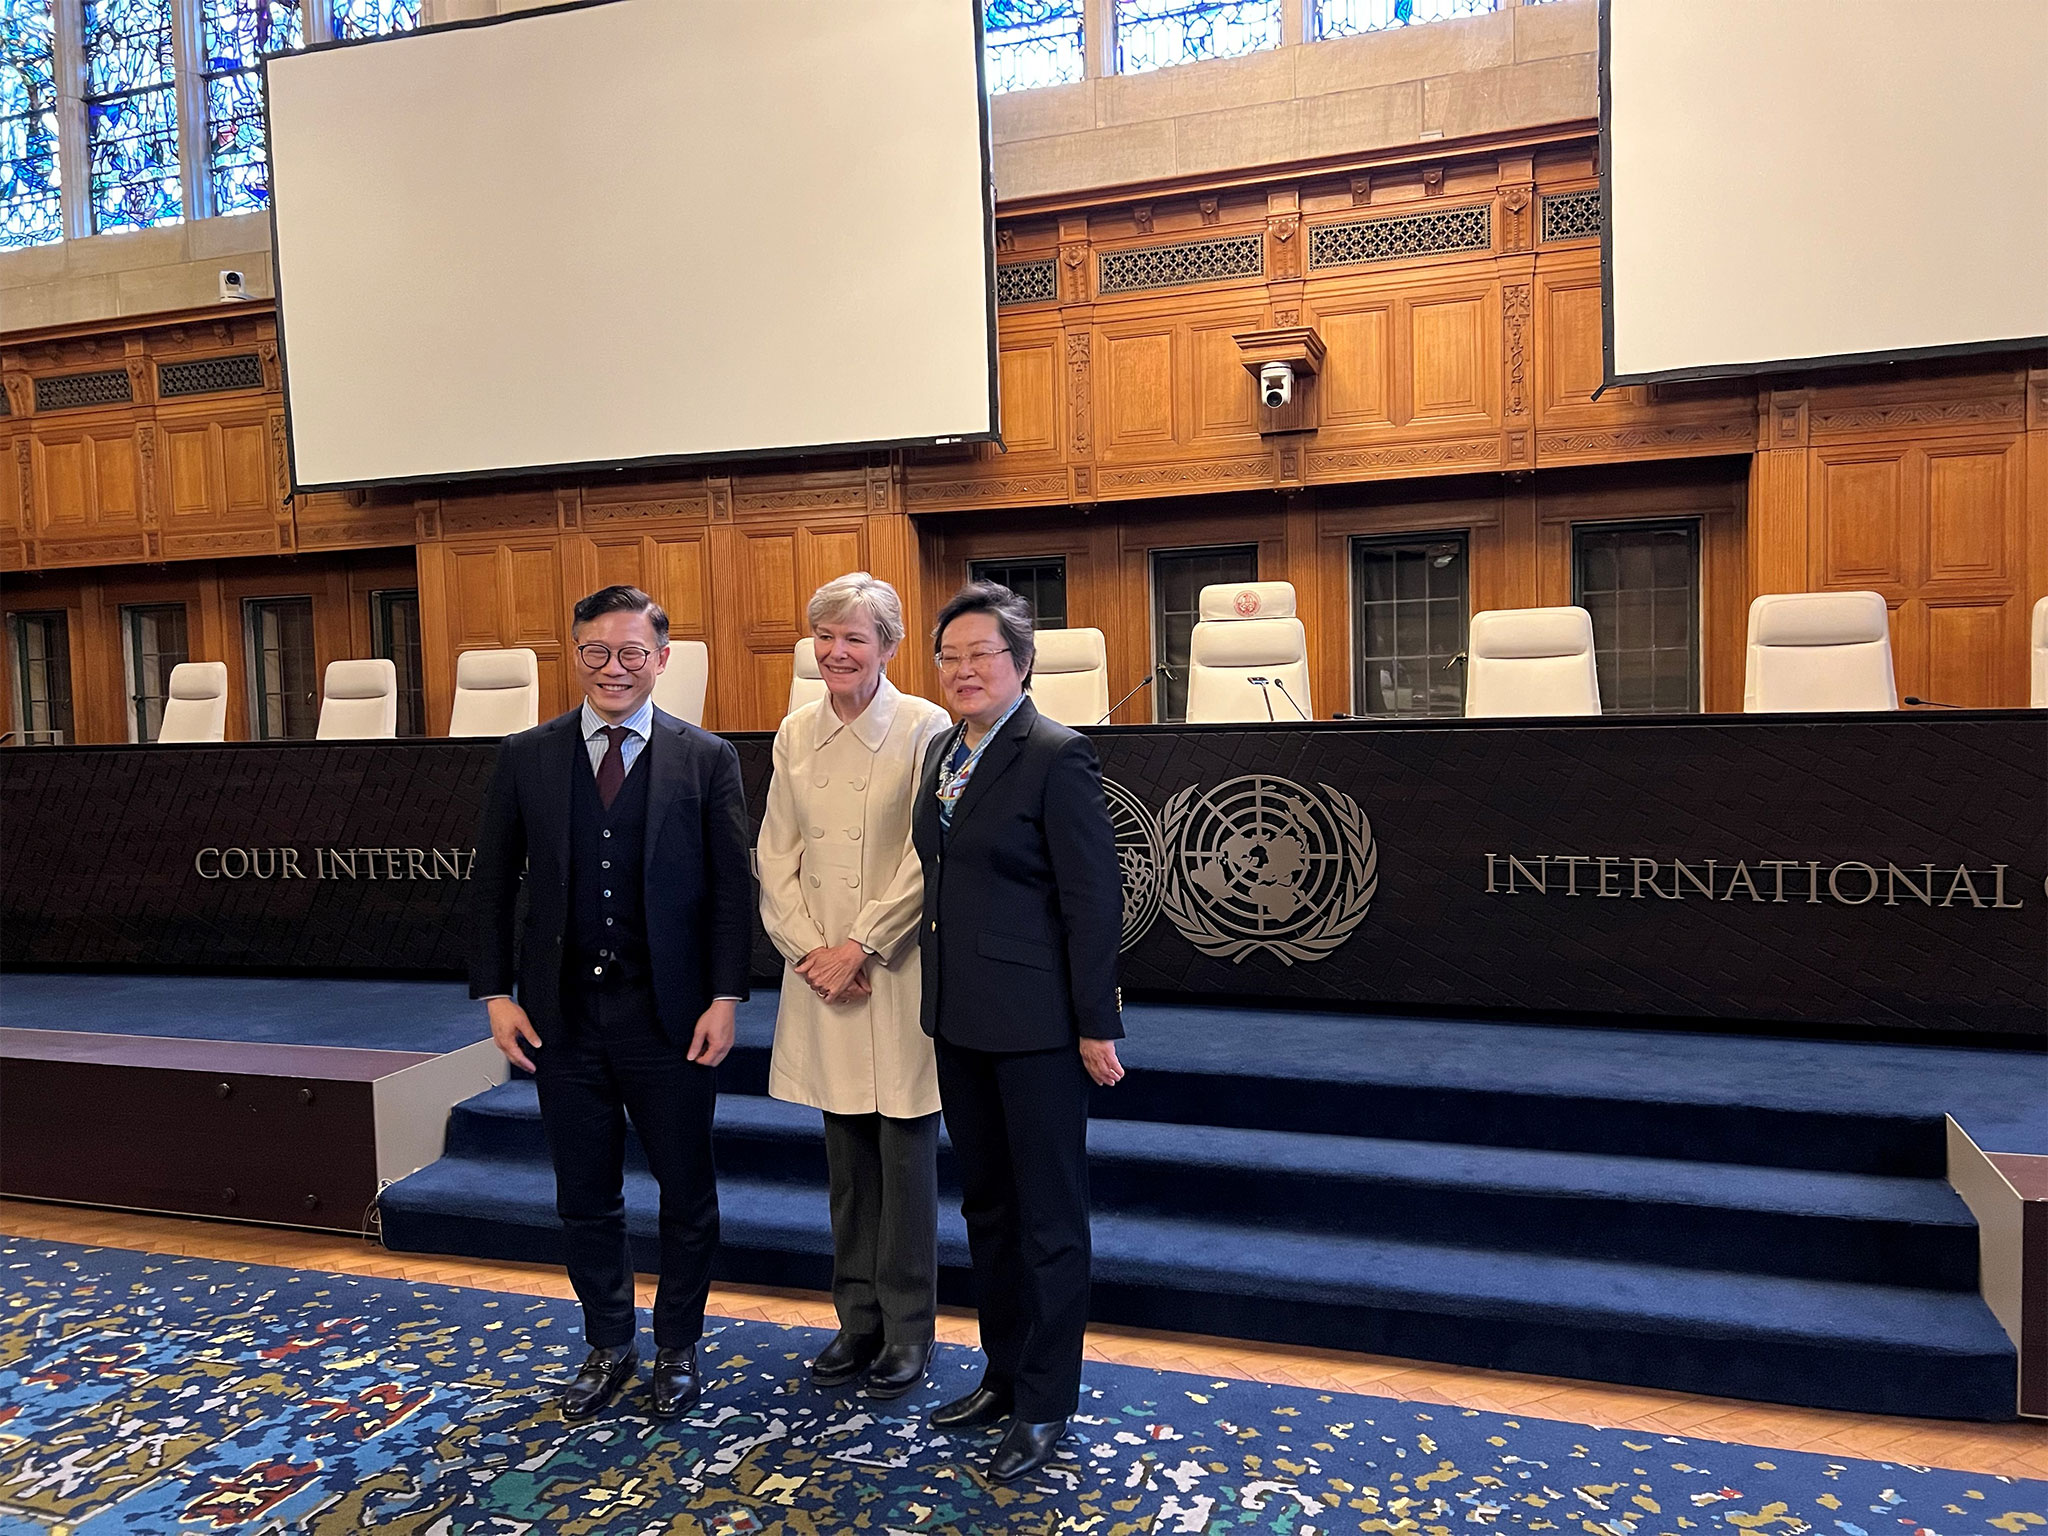 The Deputy Secretary for Justice, Mr Cheung Kwok-kwan (left) was pictured with Judge Xue Hanqin (right) and Judge Hilary Charlesworth (centre) of the United Nations International Court of Justice (ICJ) at the ICJ in The Hague, the Netherlands, on March 10 (The Hague time).